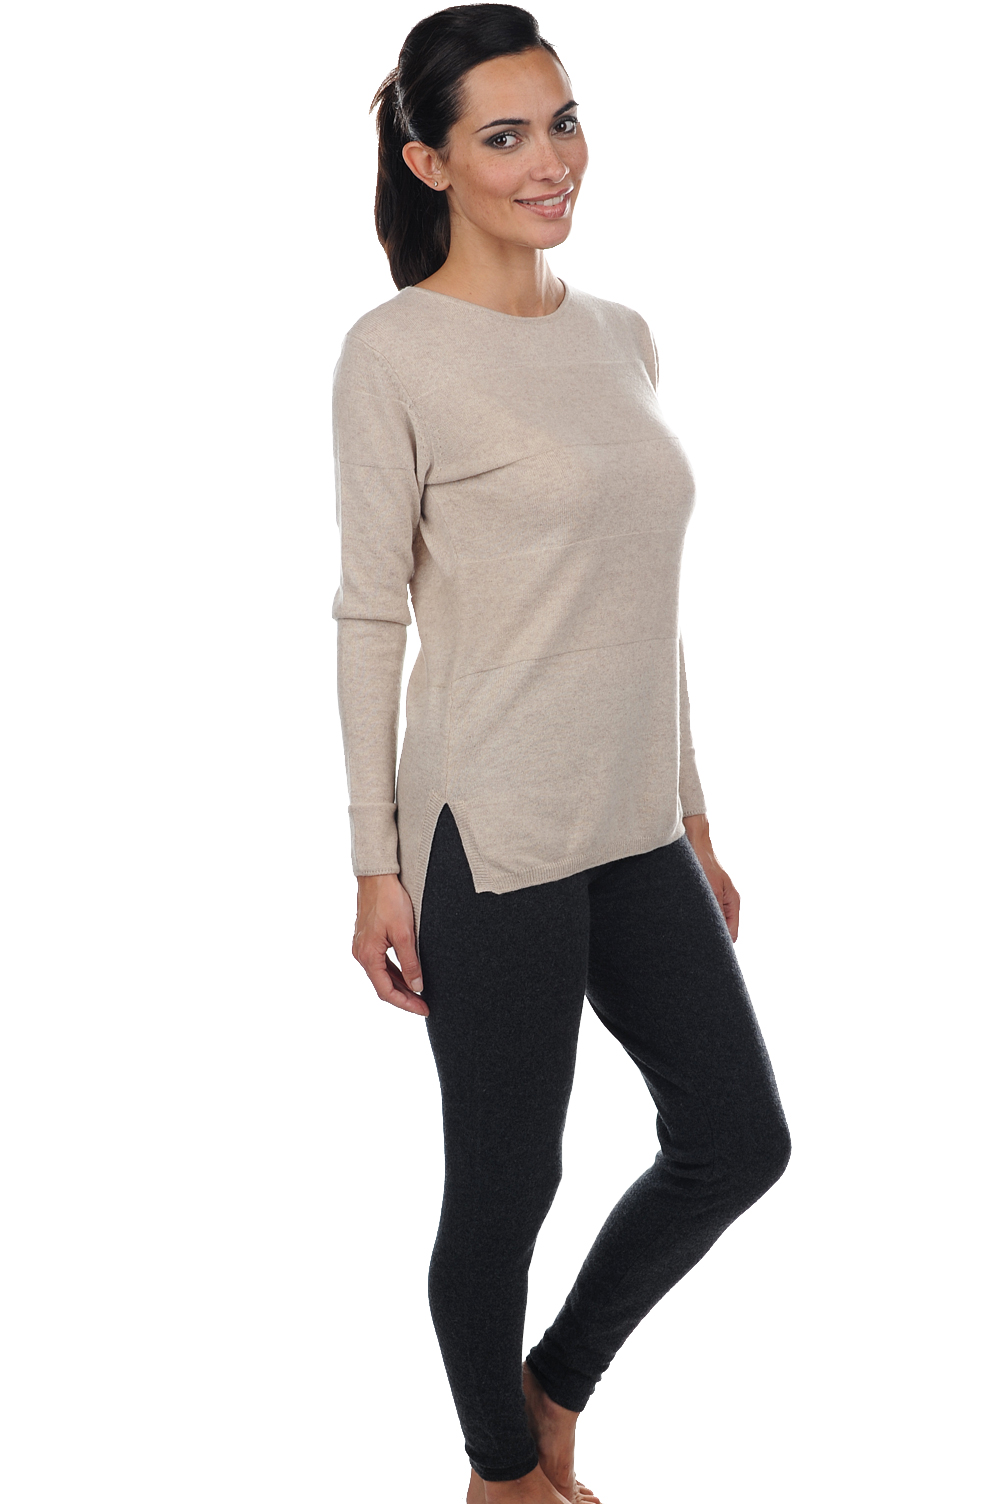 Cashmere ladies cocooning xelina charcoal marl 3xl